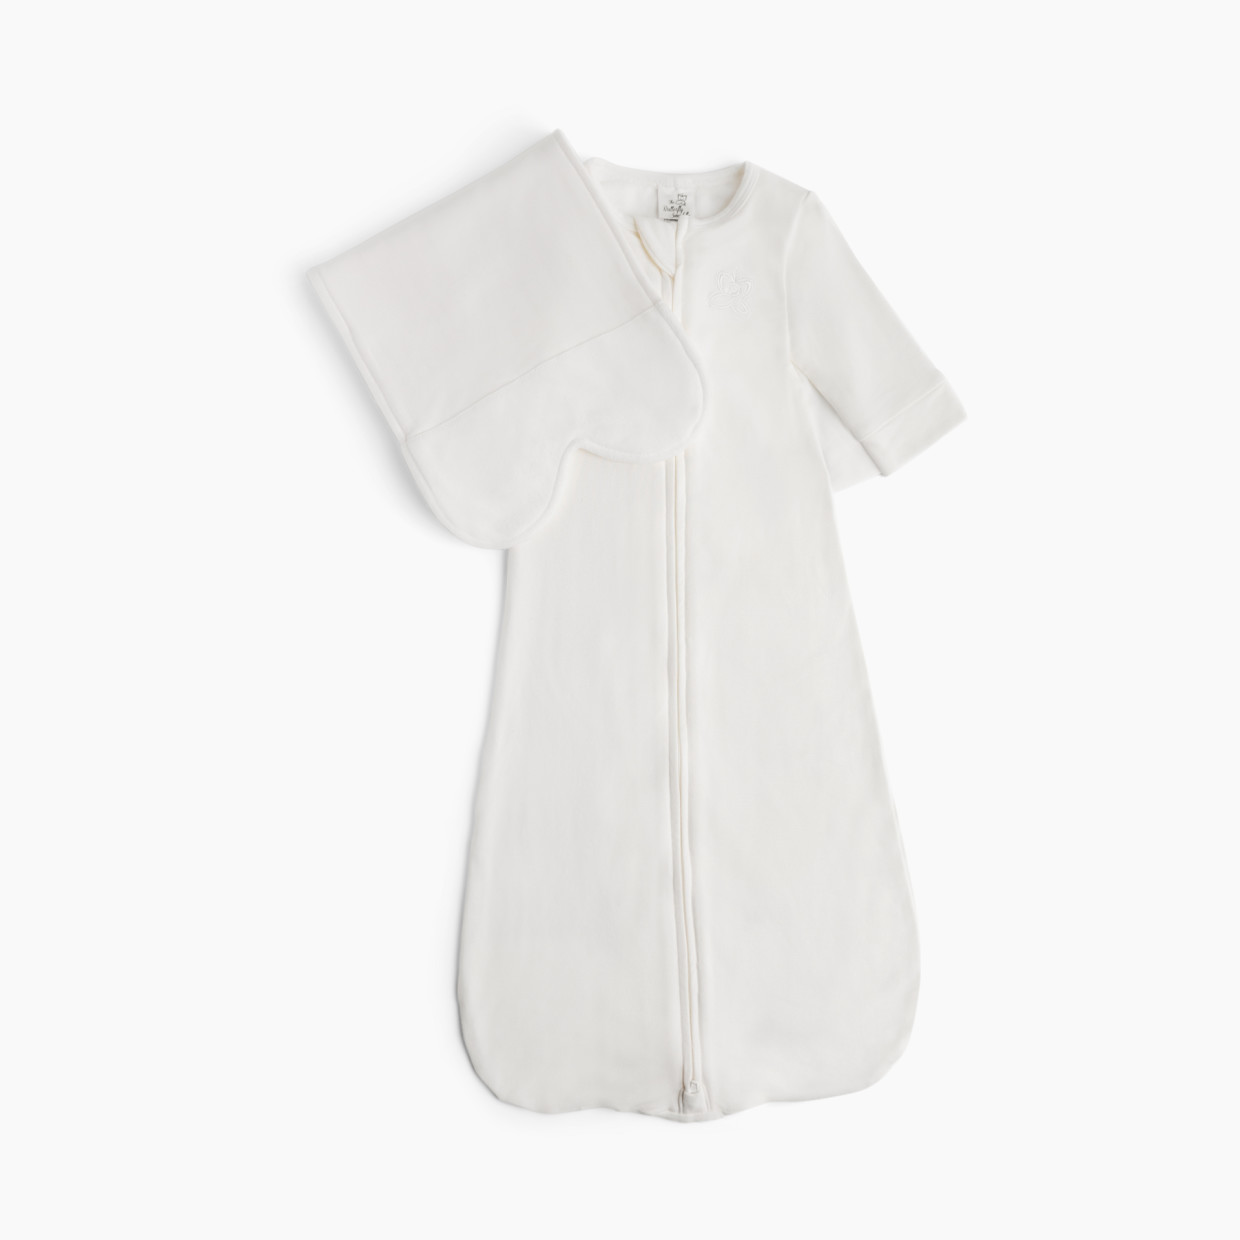 The Butterfly Swaddle Swaddle and Transitional Sleep Sack in One - Ivory White, Med/Large (12 -17 Lbs).